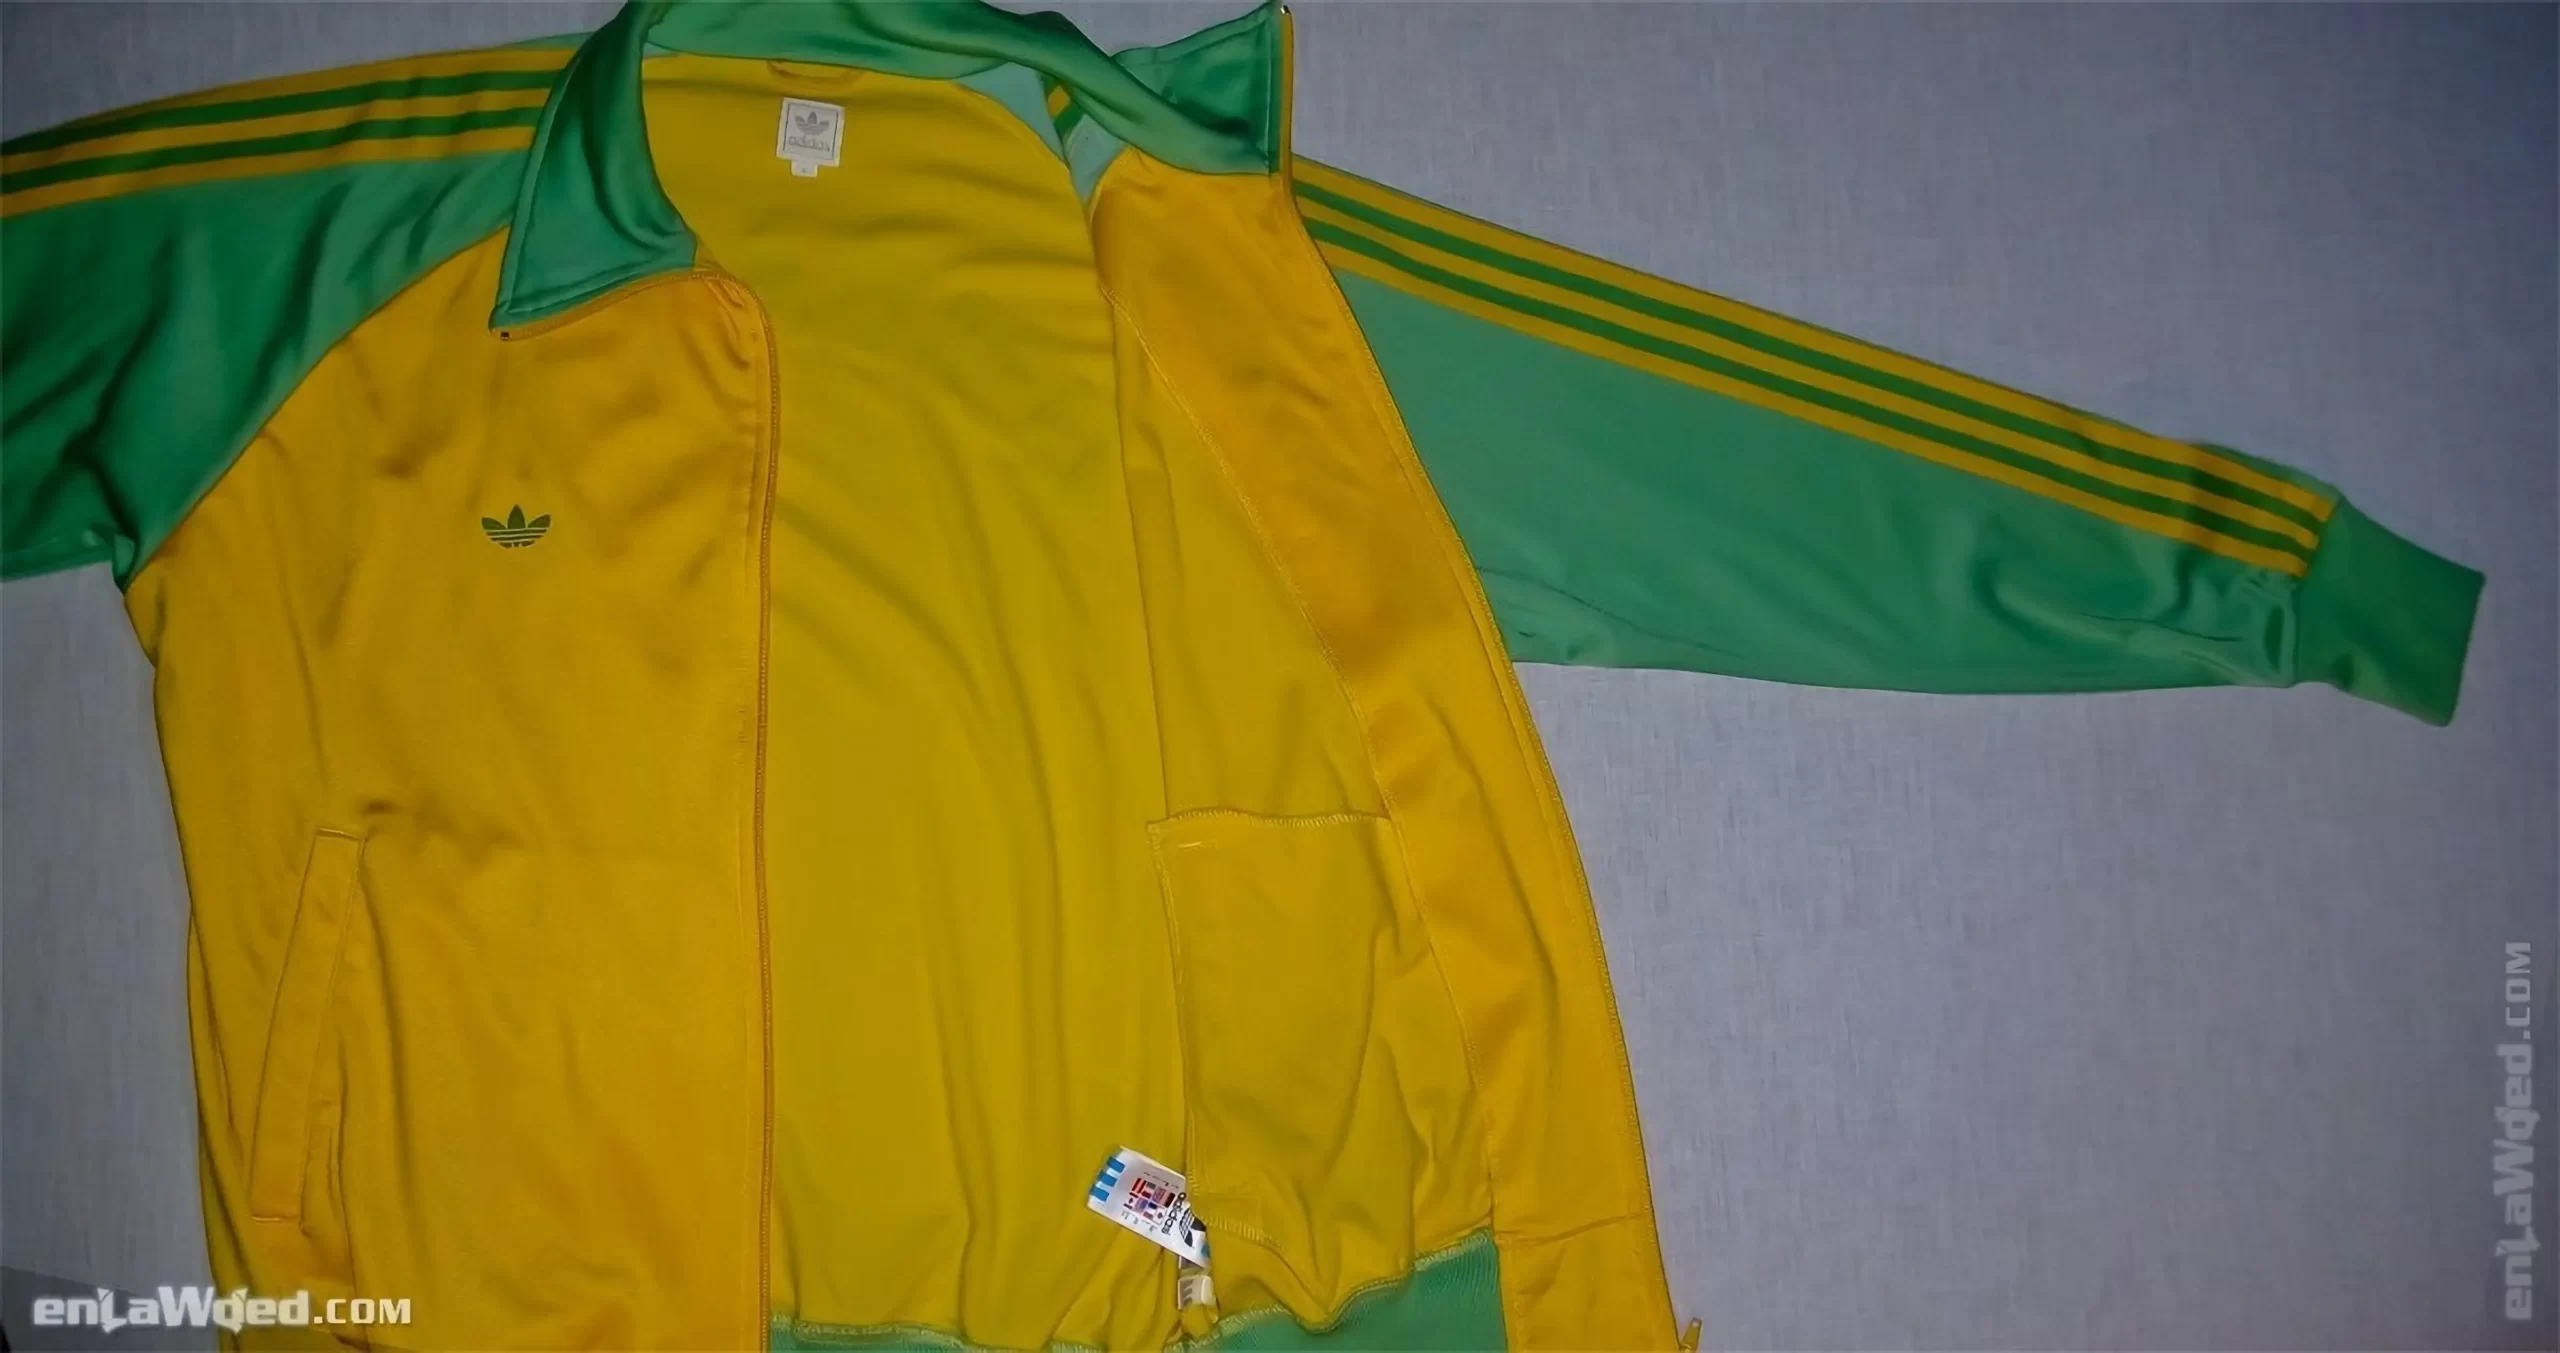 Men’s 2003 Zimbabwe Track Top by Adidas: Indulgence (EnLawded.com file #lmch03s6l22ft48eaeq)